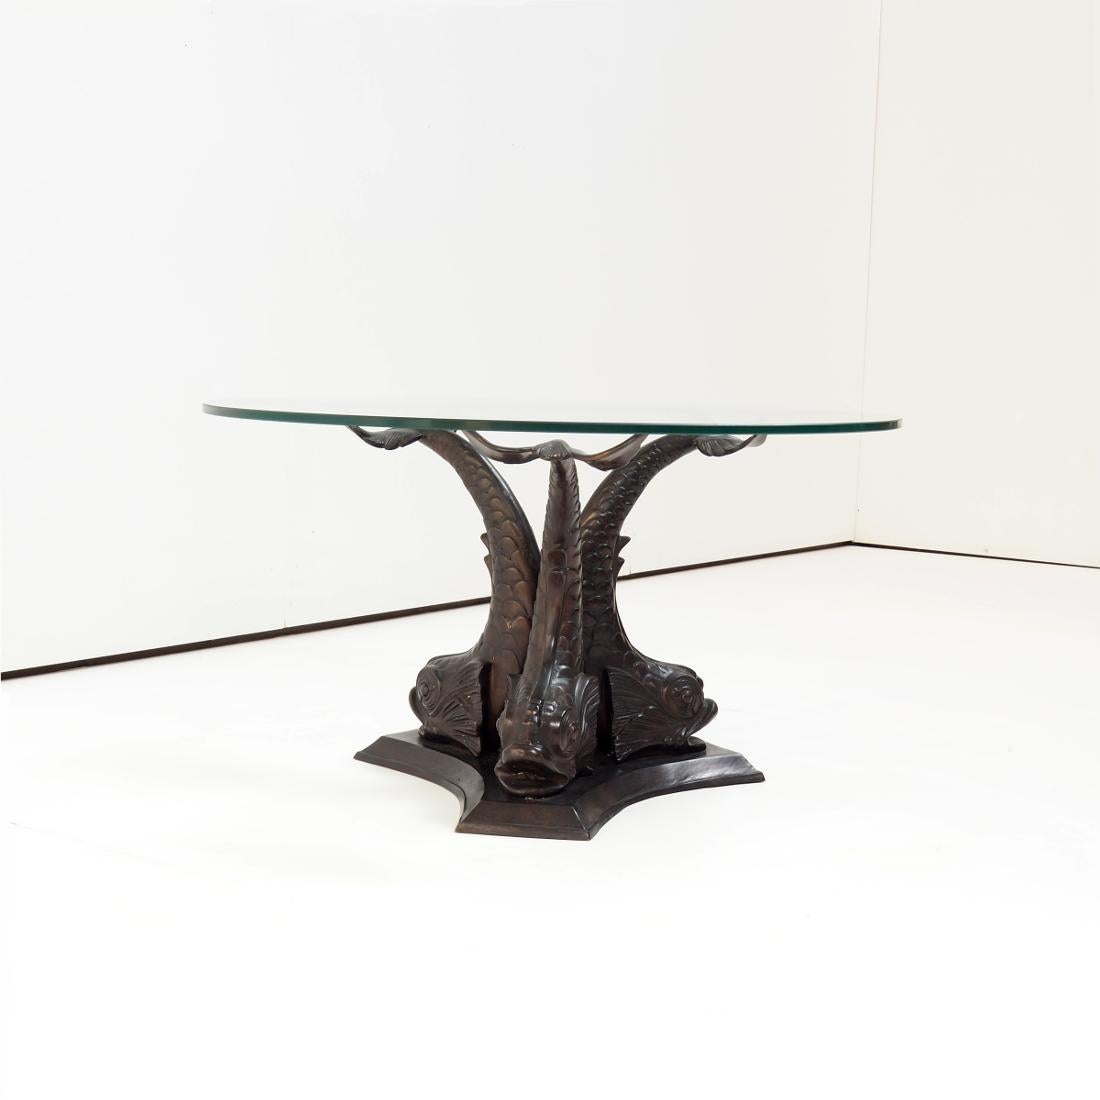 1970’s  Italian coffee table in Hollywood Regency style. It has a ‘Koi Fish’ base and a beautiful thick glass top. In full original condition.

The bronze base is naturally colored due to age and shows hardly any wear and tear.

H x w x d = 19,7 x